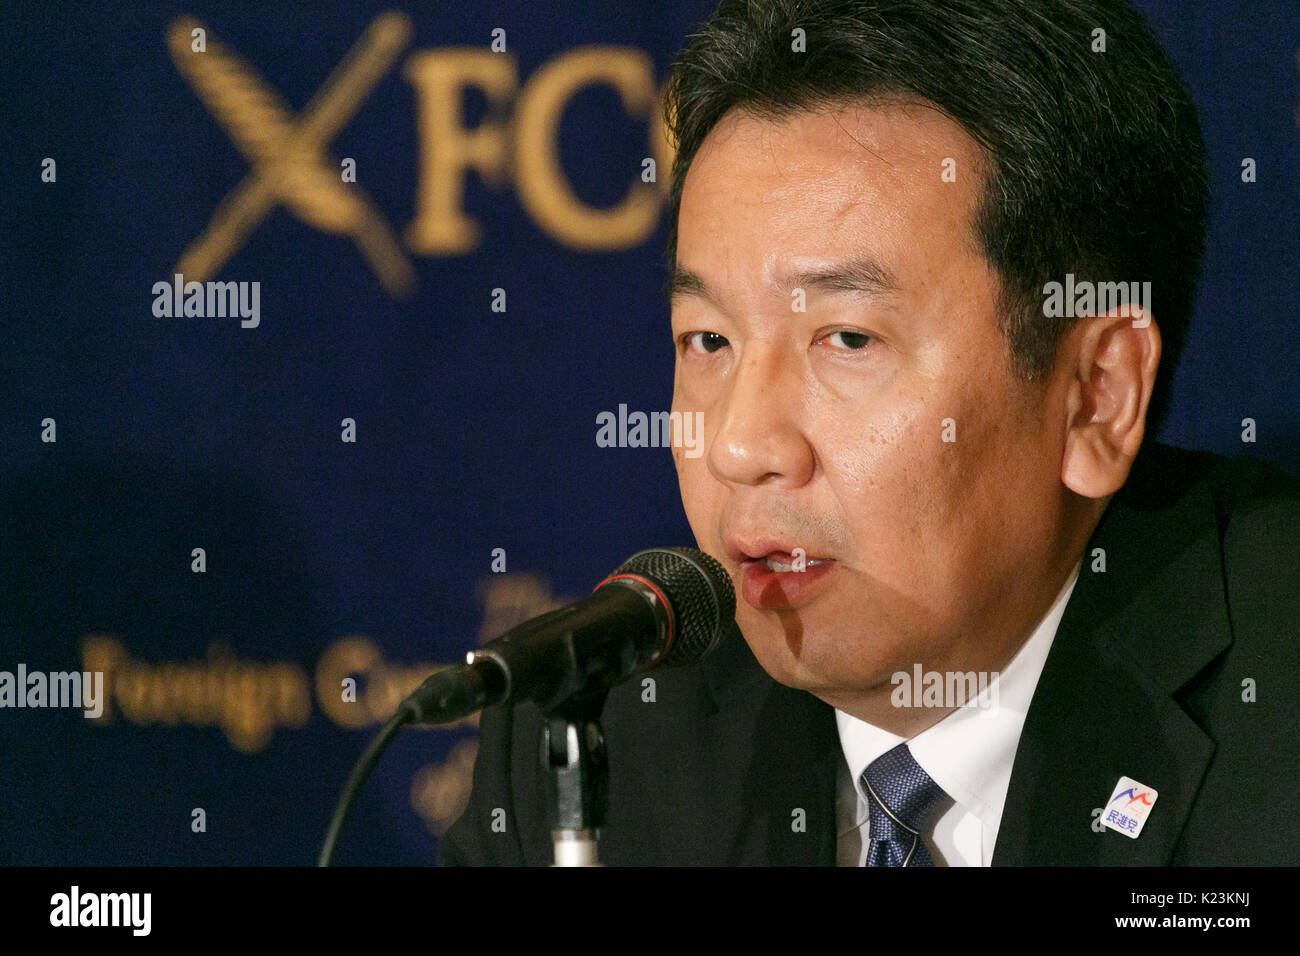 Former Democratic Party (DP) Secretary General Yukio Edano speaks during a news conference at the Foreign Correspondents' Club of Japan on August 29, 2017, Tokyo, Japan. Edano and former DP Foreign Minister, Maehara, visited the Club to speak about the opposition party's leadership election which will be held on September 1st. They also commented North Korea's missile launch that flew over Japan this morning. Credit: Rodrigo Reyes Marin/AFLO/Alamy Live News Stock Photo